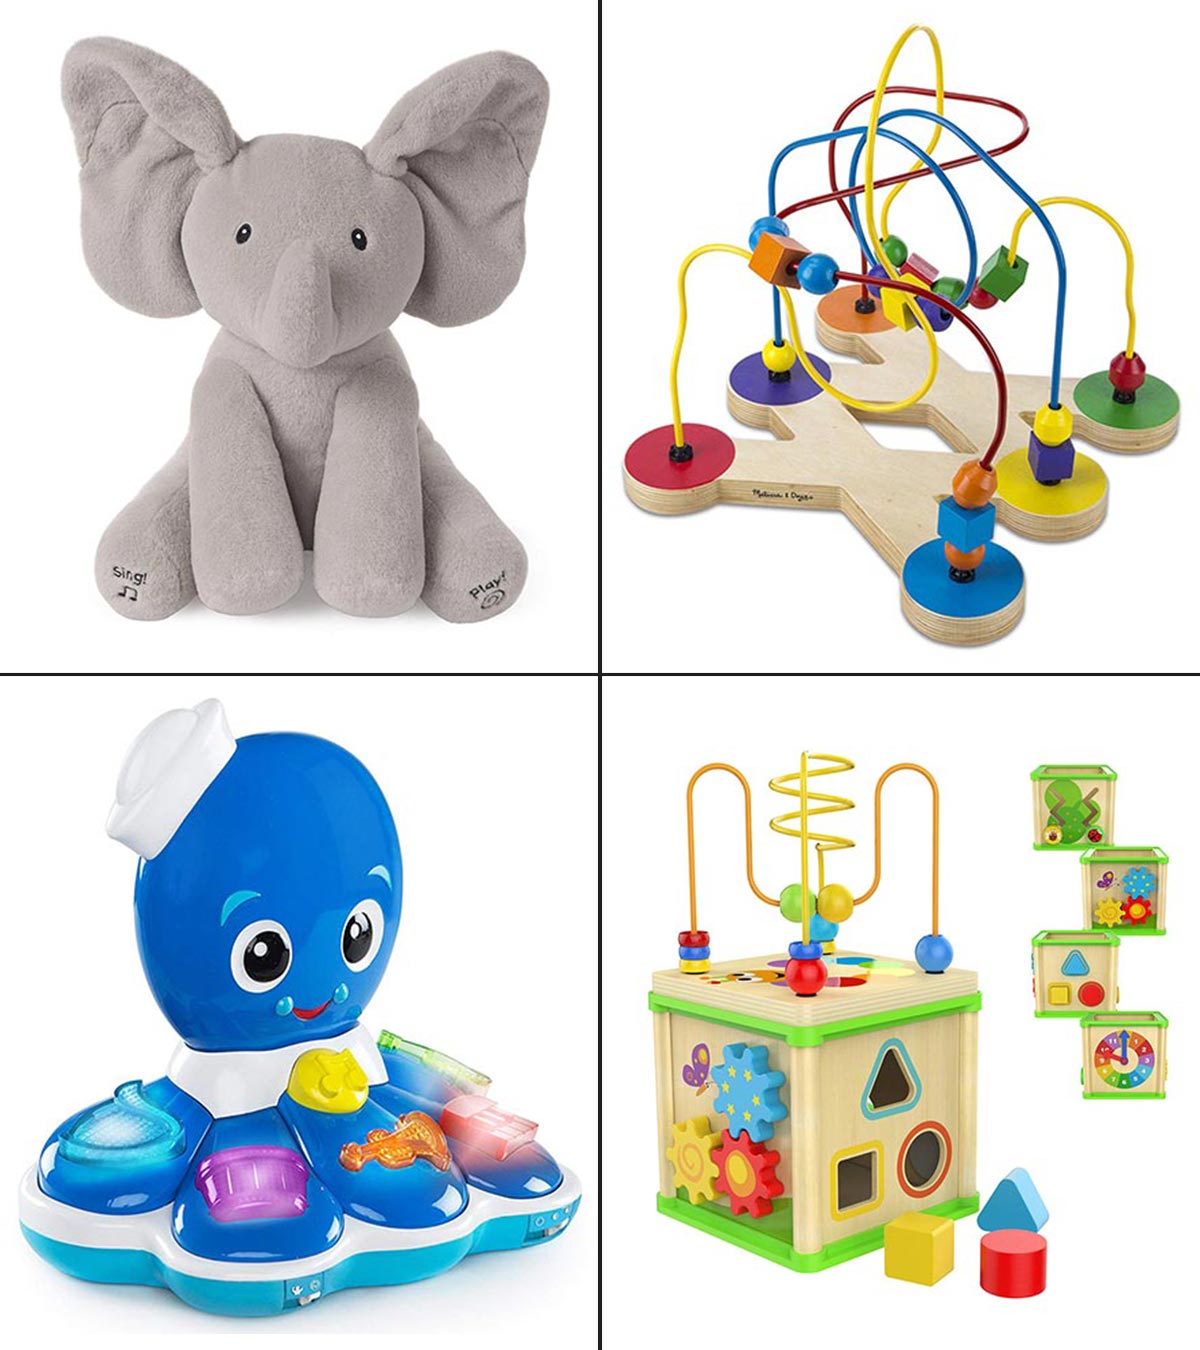 Best Baby Toys For Language Development: Play Your Way To Talking